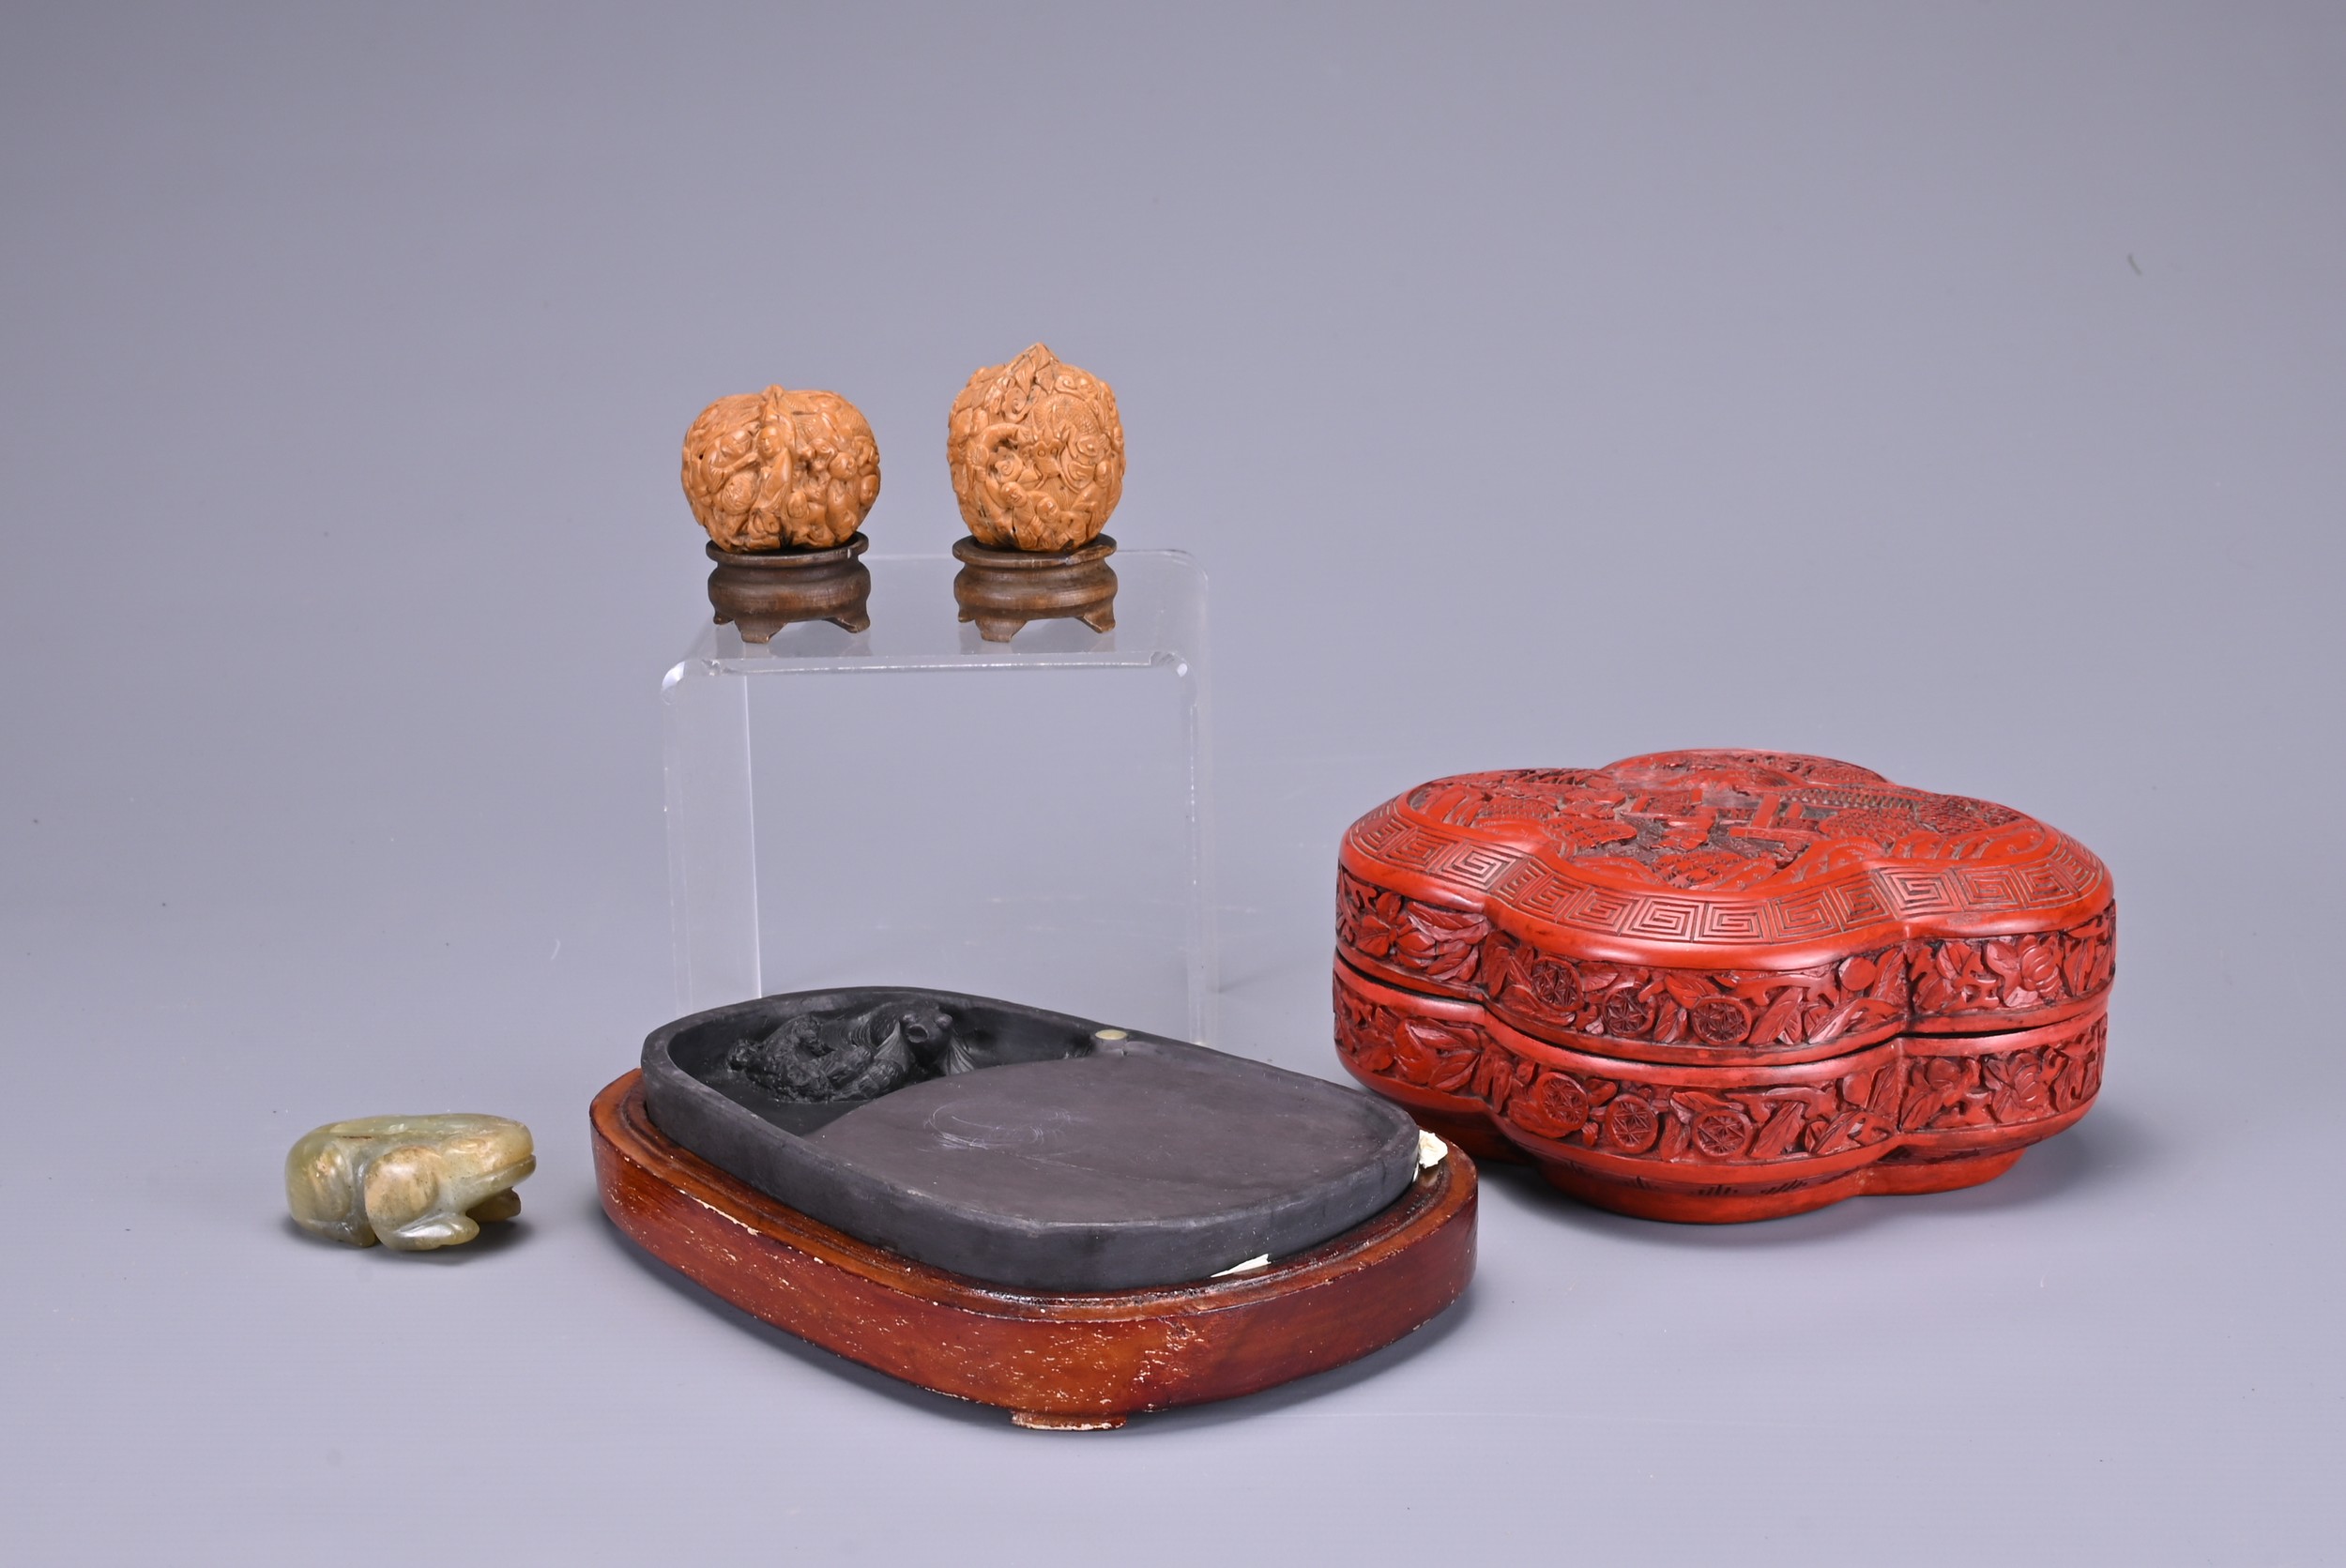 TWO CHINESE CARVED WALNUTS, A CINNABAR LACQUER BOX AND COVER, AN INKSTONE AND WOODEN CASE AND A